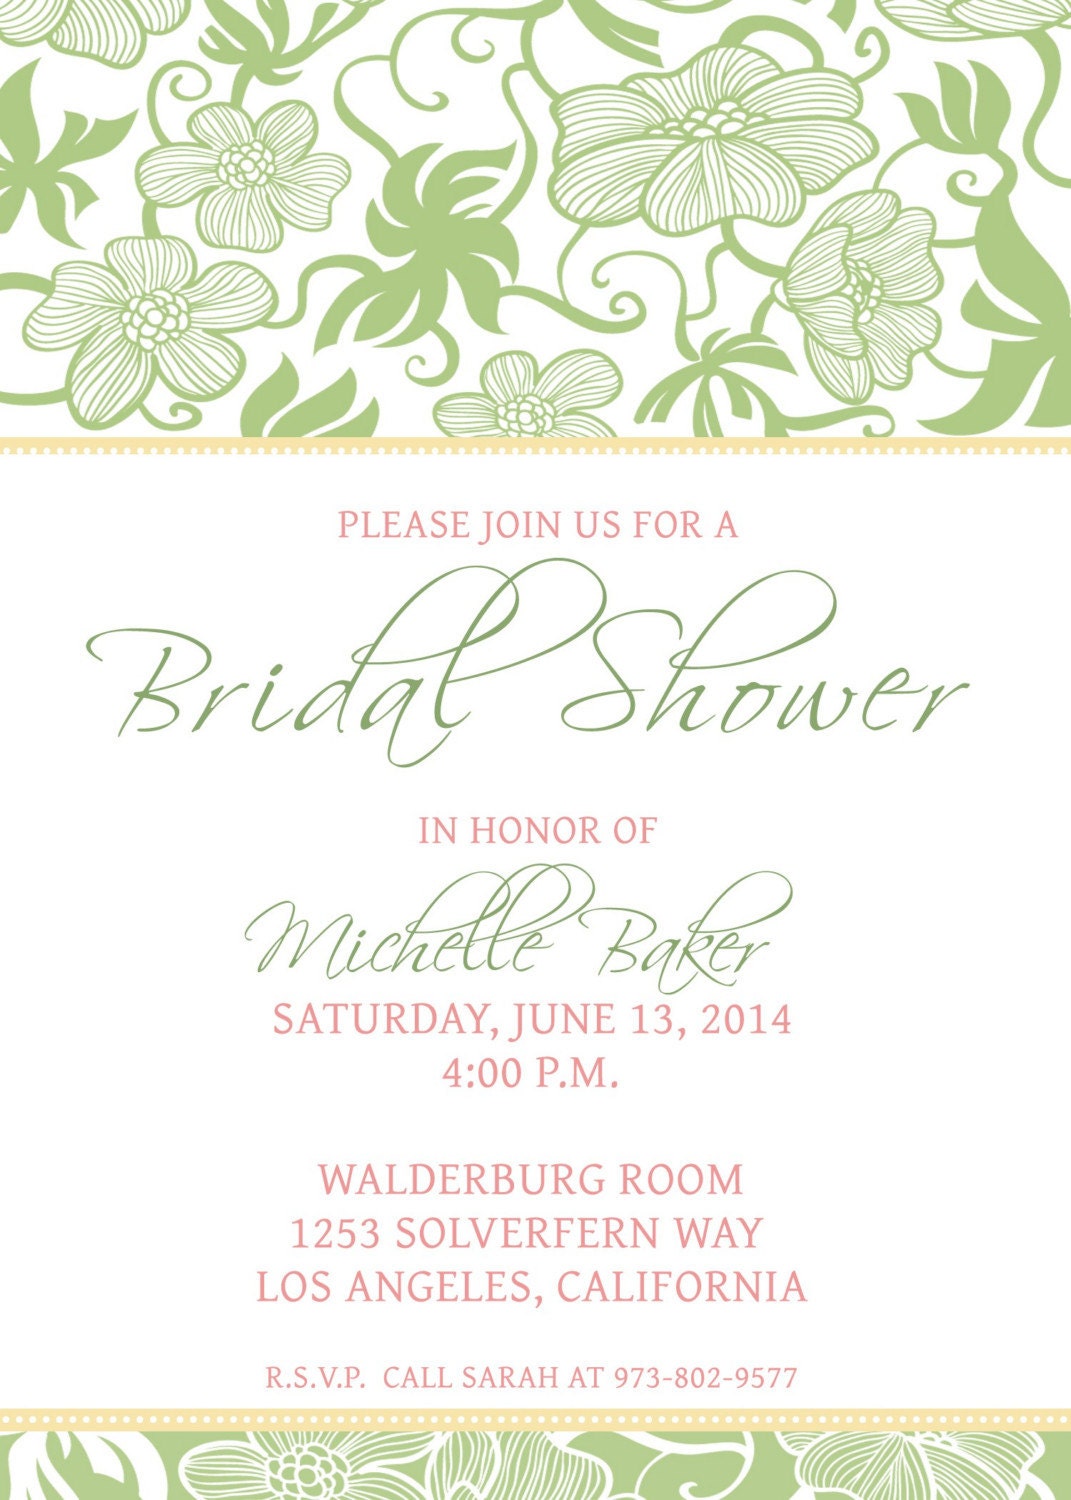 Printable Bridal Shower Invitation Template by CBDesignCollection ...